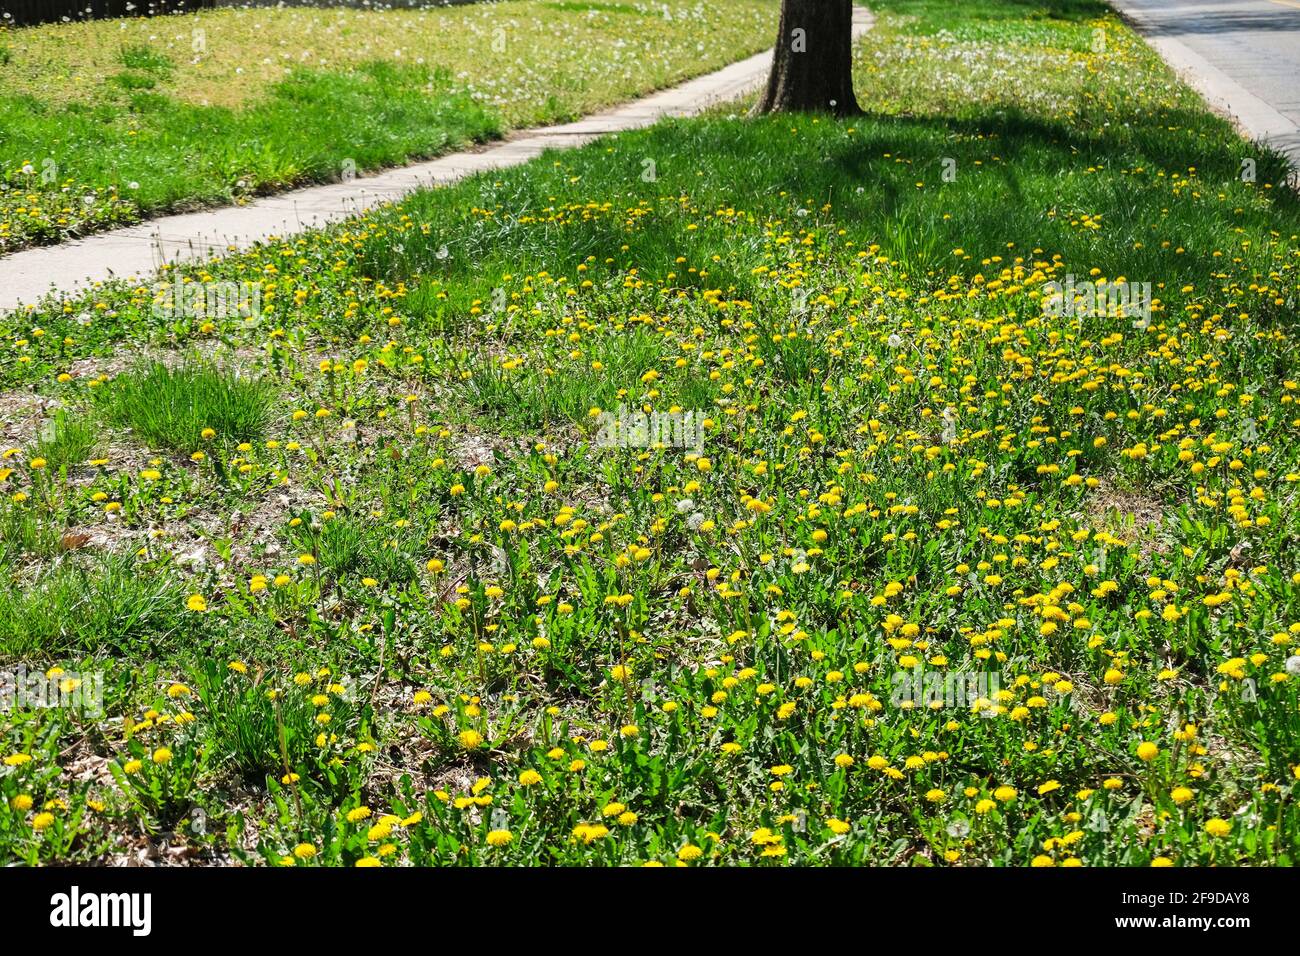 Many common dandelions, T. officinale, edible wildflowers, growing between a sidewalk and street in the spring. Kansas, USA Stock Photo